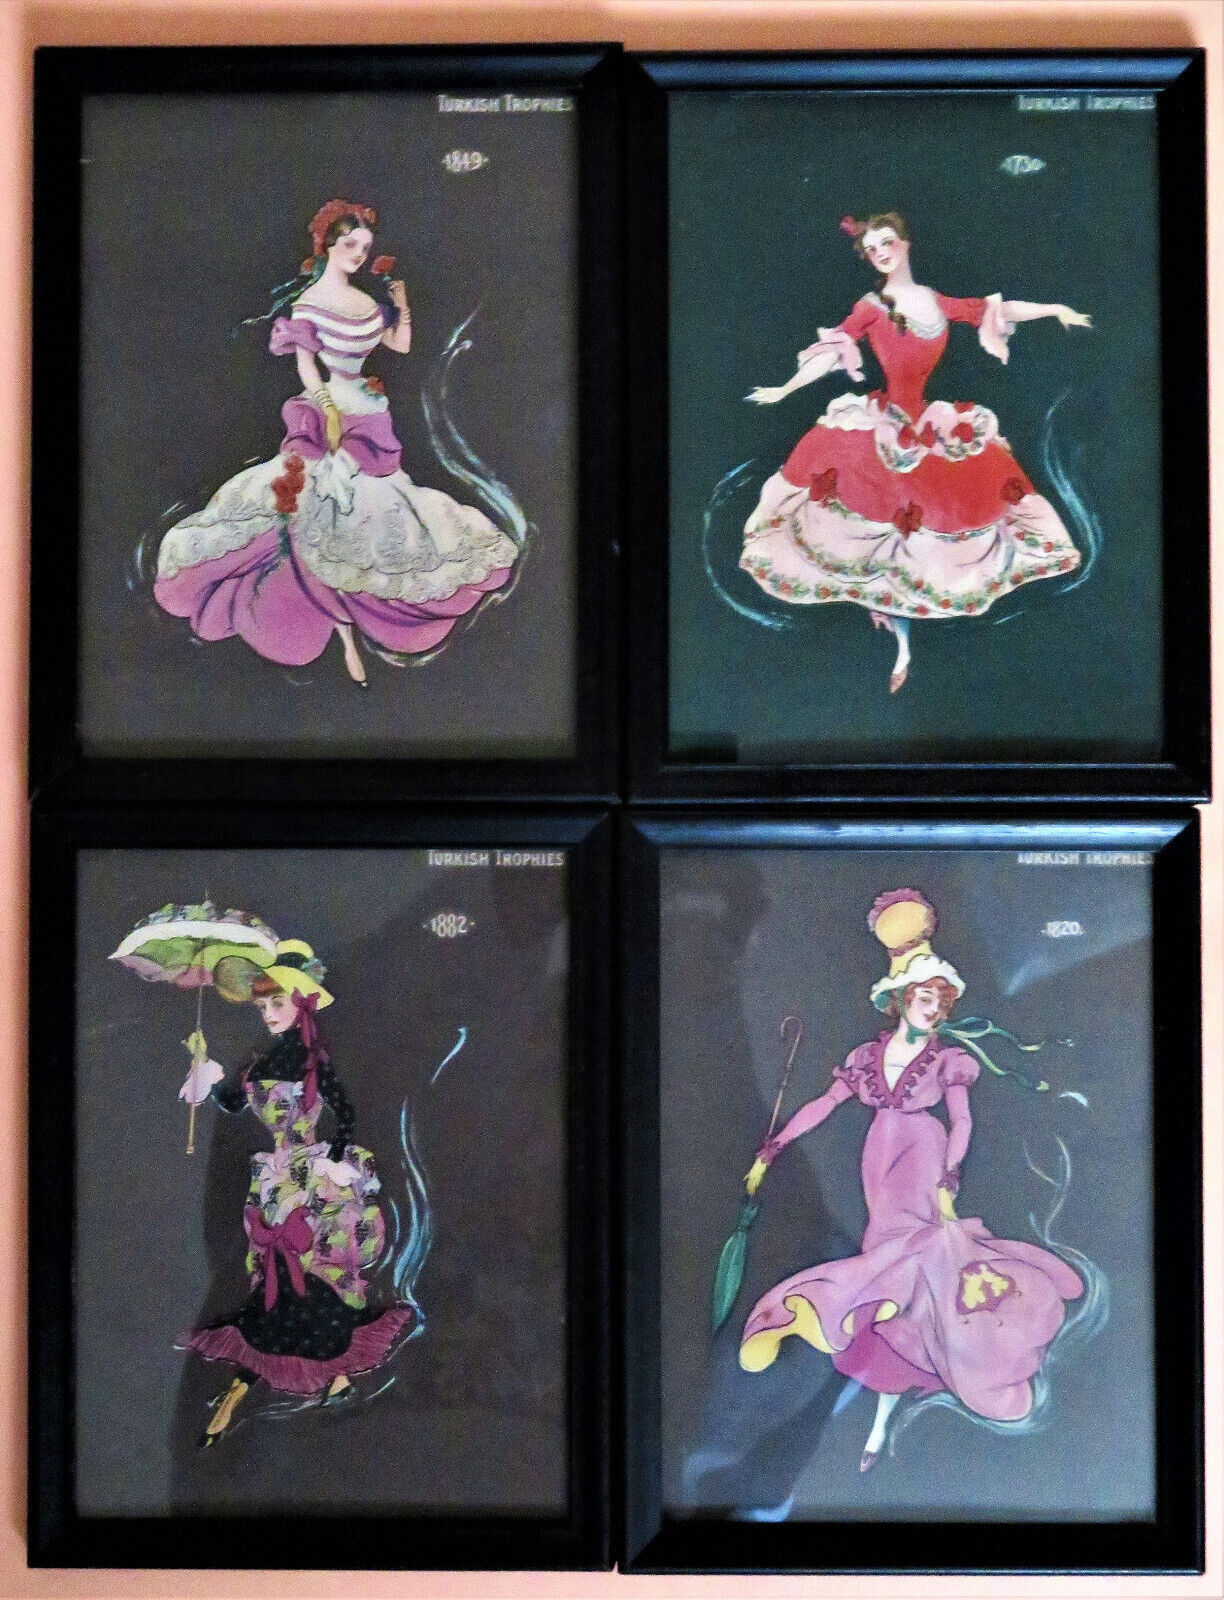 4 Turkish Trophies 1700's-1800's Women Period Gowns Premium Tobacco Cards Framed